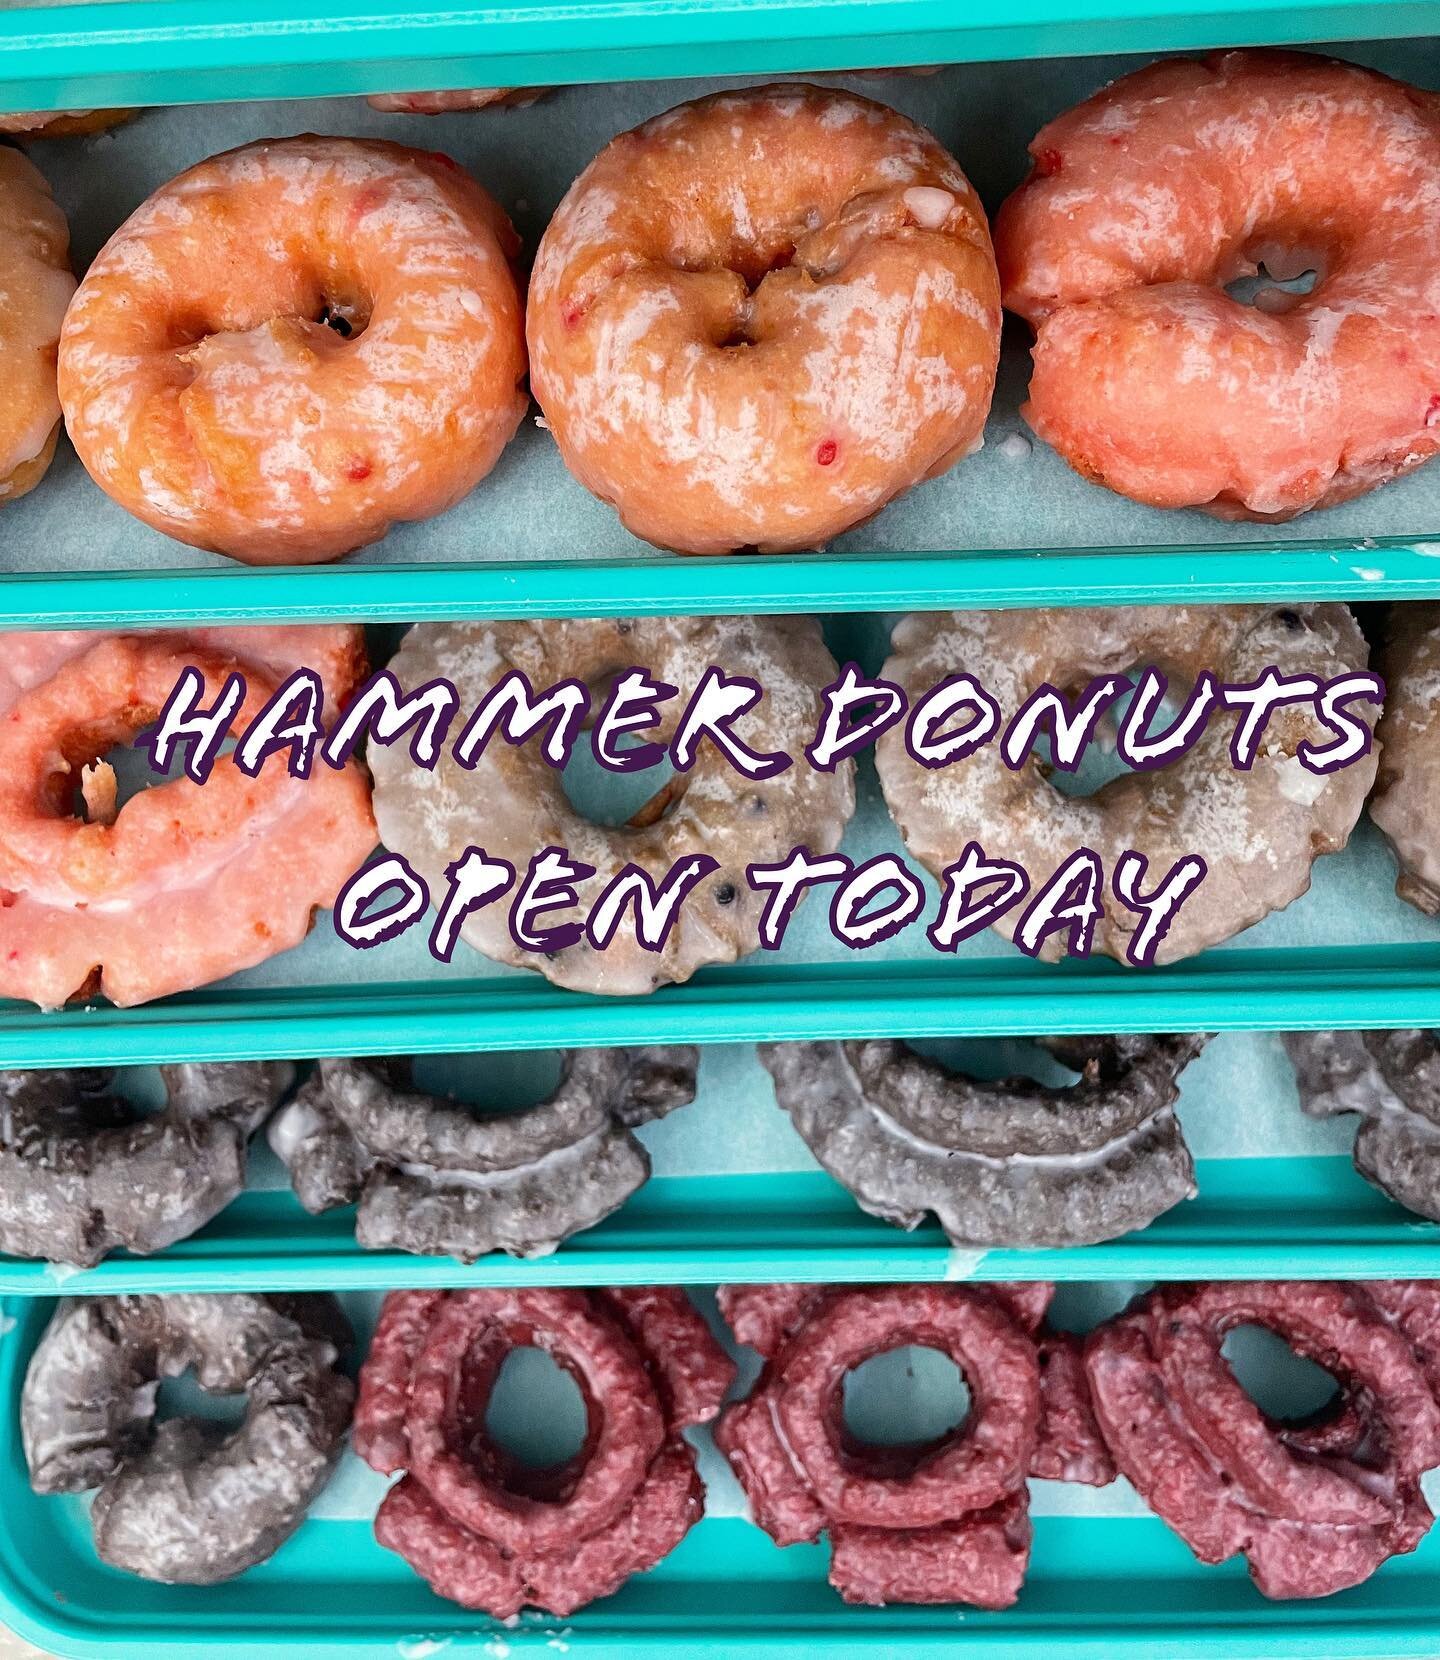 We are open from 6 AM to 6 PM today!
All cake donuts only $0.99 each - any flavor 😍
#hammerdonuts #freshdonuts #handmadedonuts #donuts #doughnuts #donutshop #donutandcoffee #fooddelivery #grubhub #cakedonuts #yeastdonuts #downtownlafayette #sprinkle